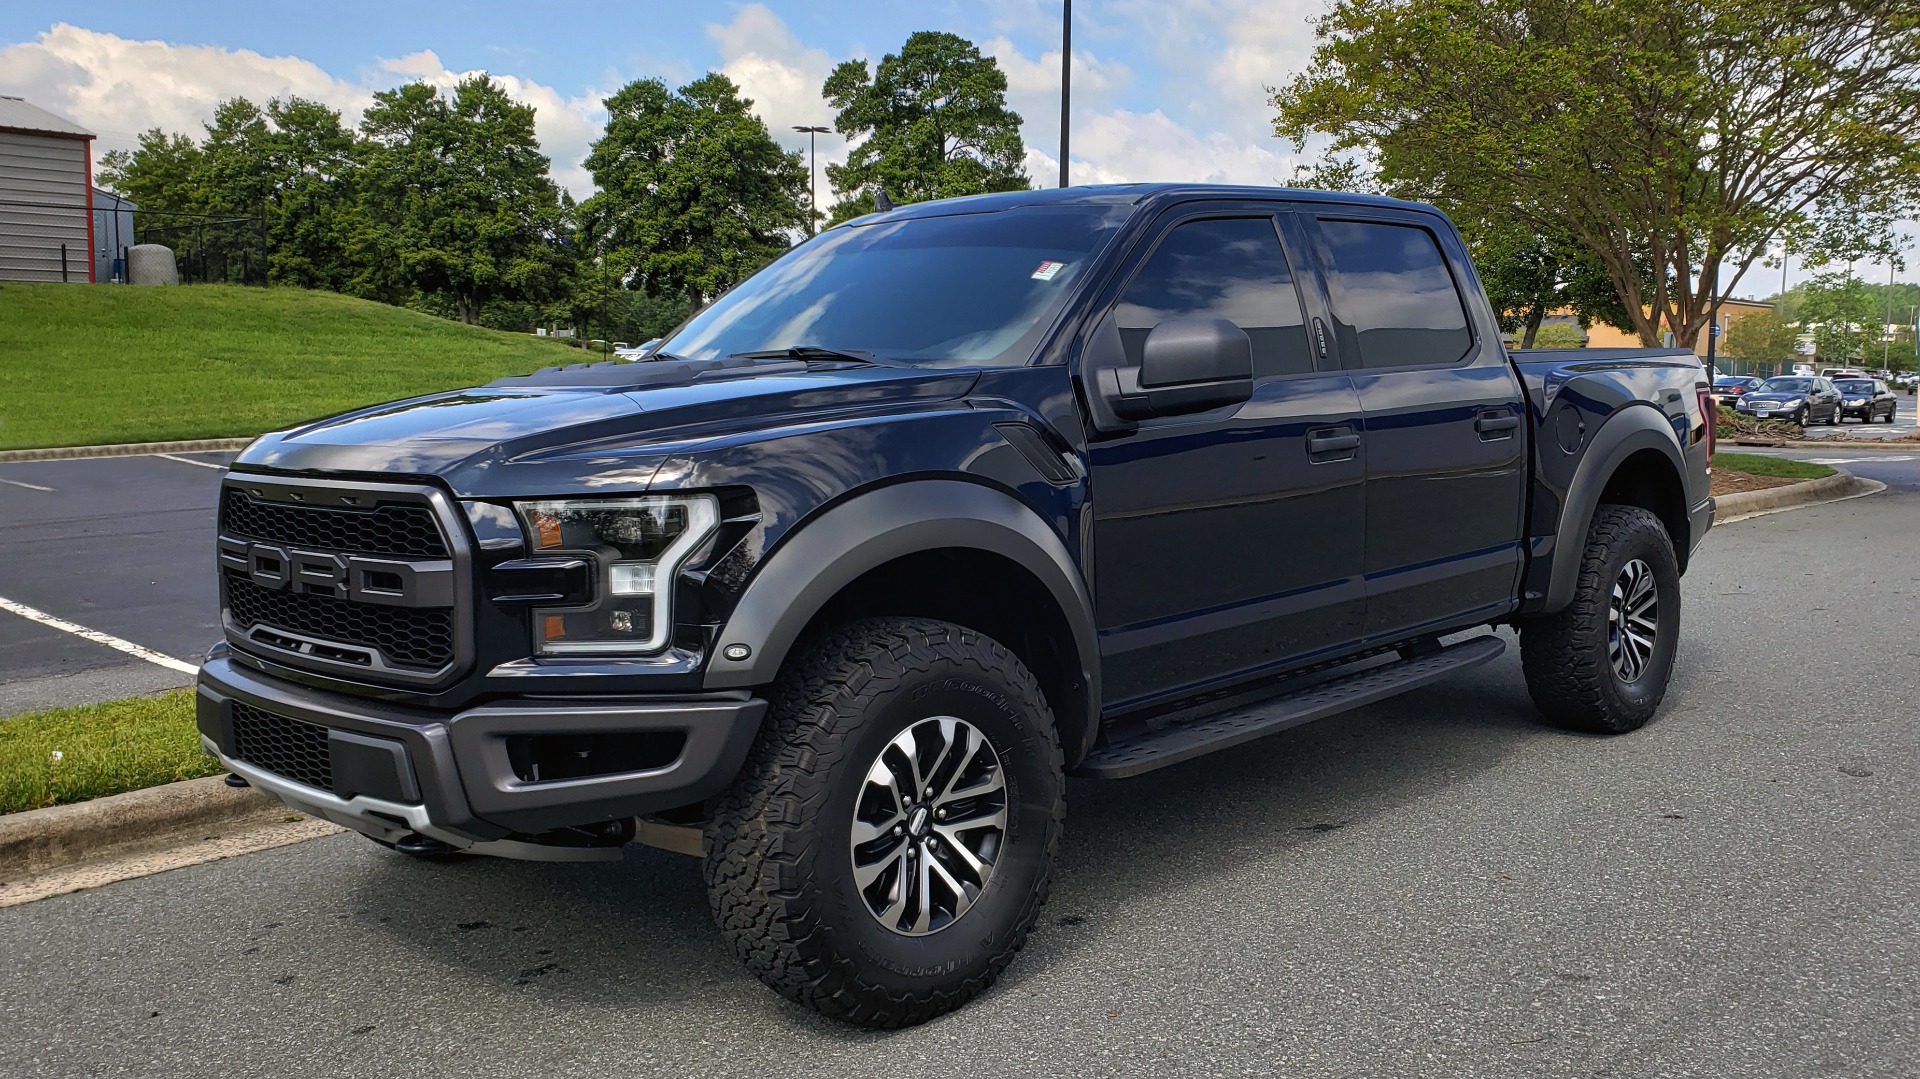 Used 2019 Ford F-150 RAPTOR CREW CAB 4X4 5.5' BOX / REMOTE START / TAILGATE STEP for sale Sold at Formula Imports in Charlotte NC 28227 1